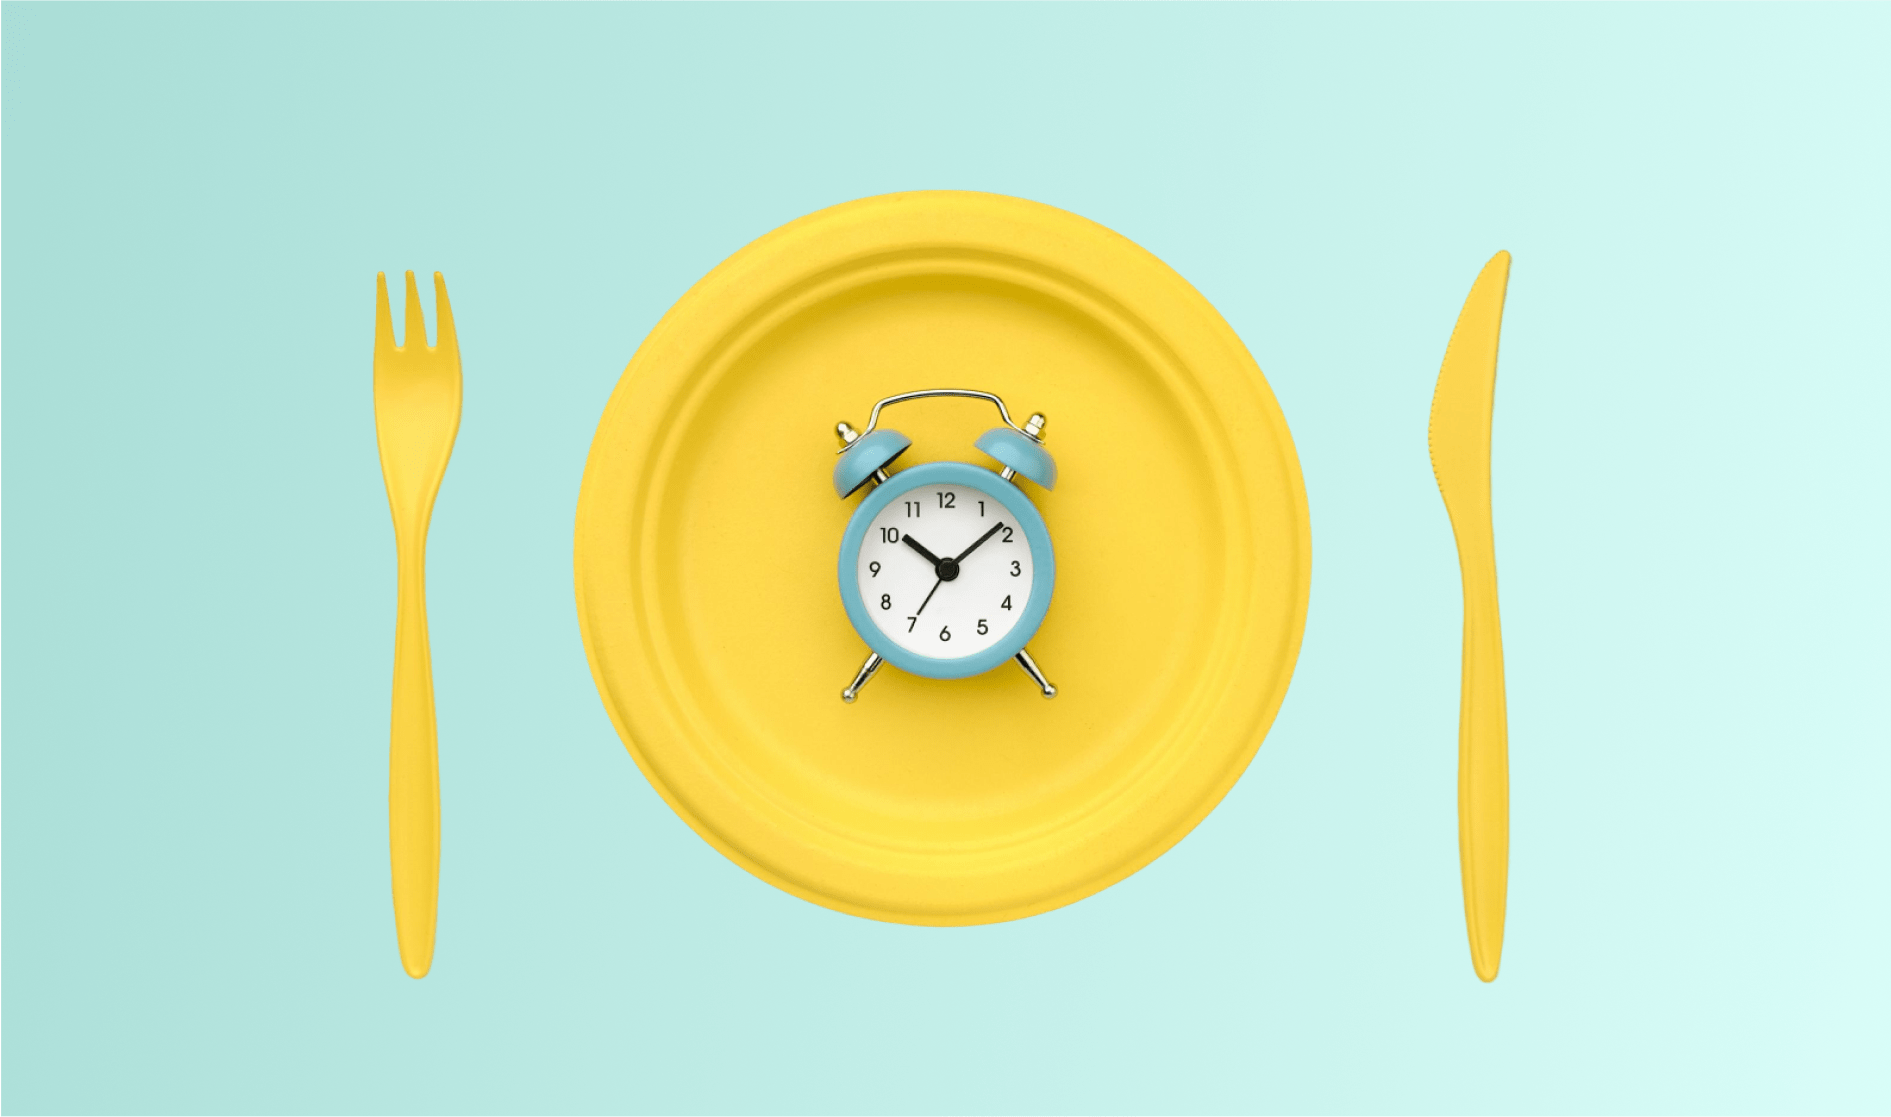 A conceptual representation of intermittent fasting featuring a yellow plate with a blue alarm clock at its center, flanked by a yellow fork on the left and a yellow knife on the right, against a pastel blue background. This imagery prompts the question: Can You Take Medicine While Intermittent Fasting?